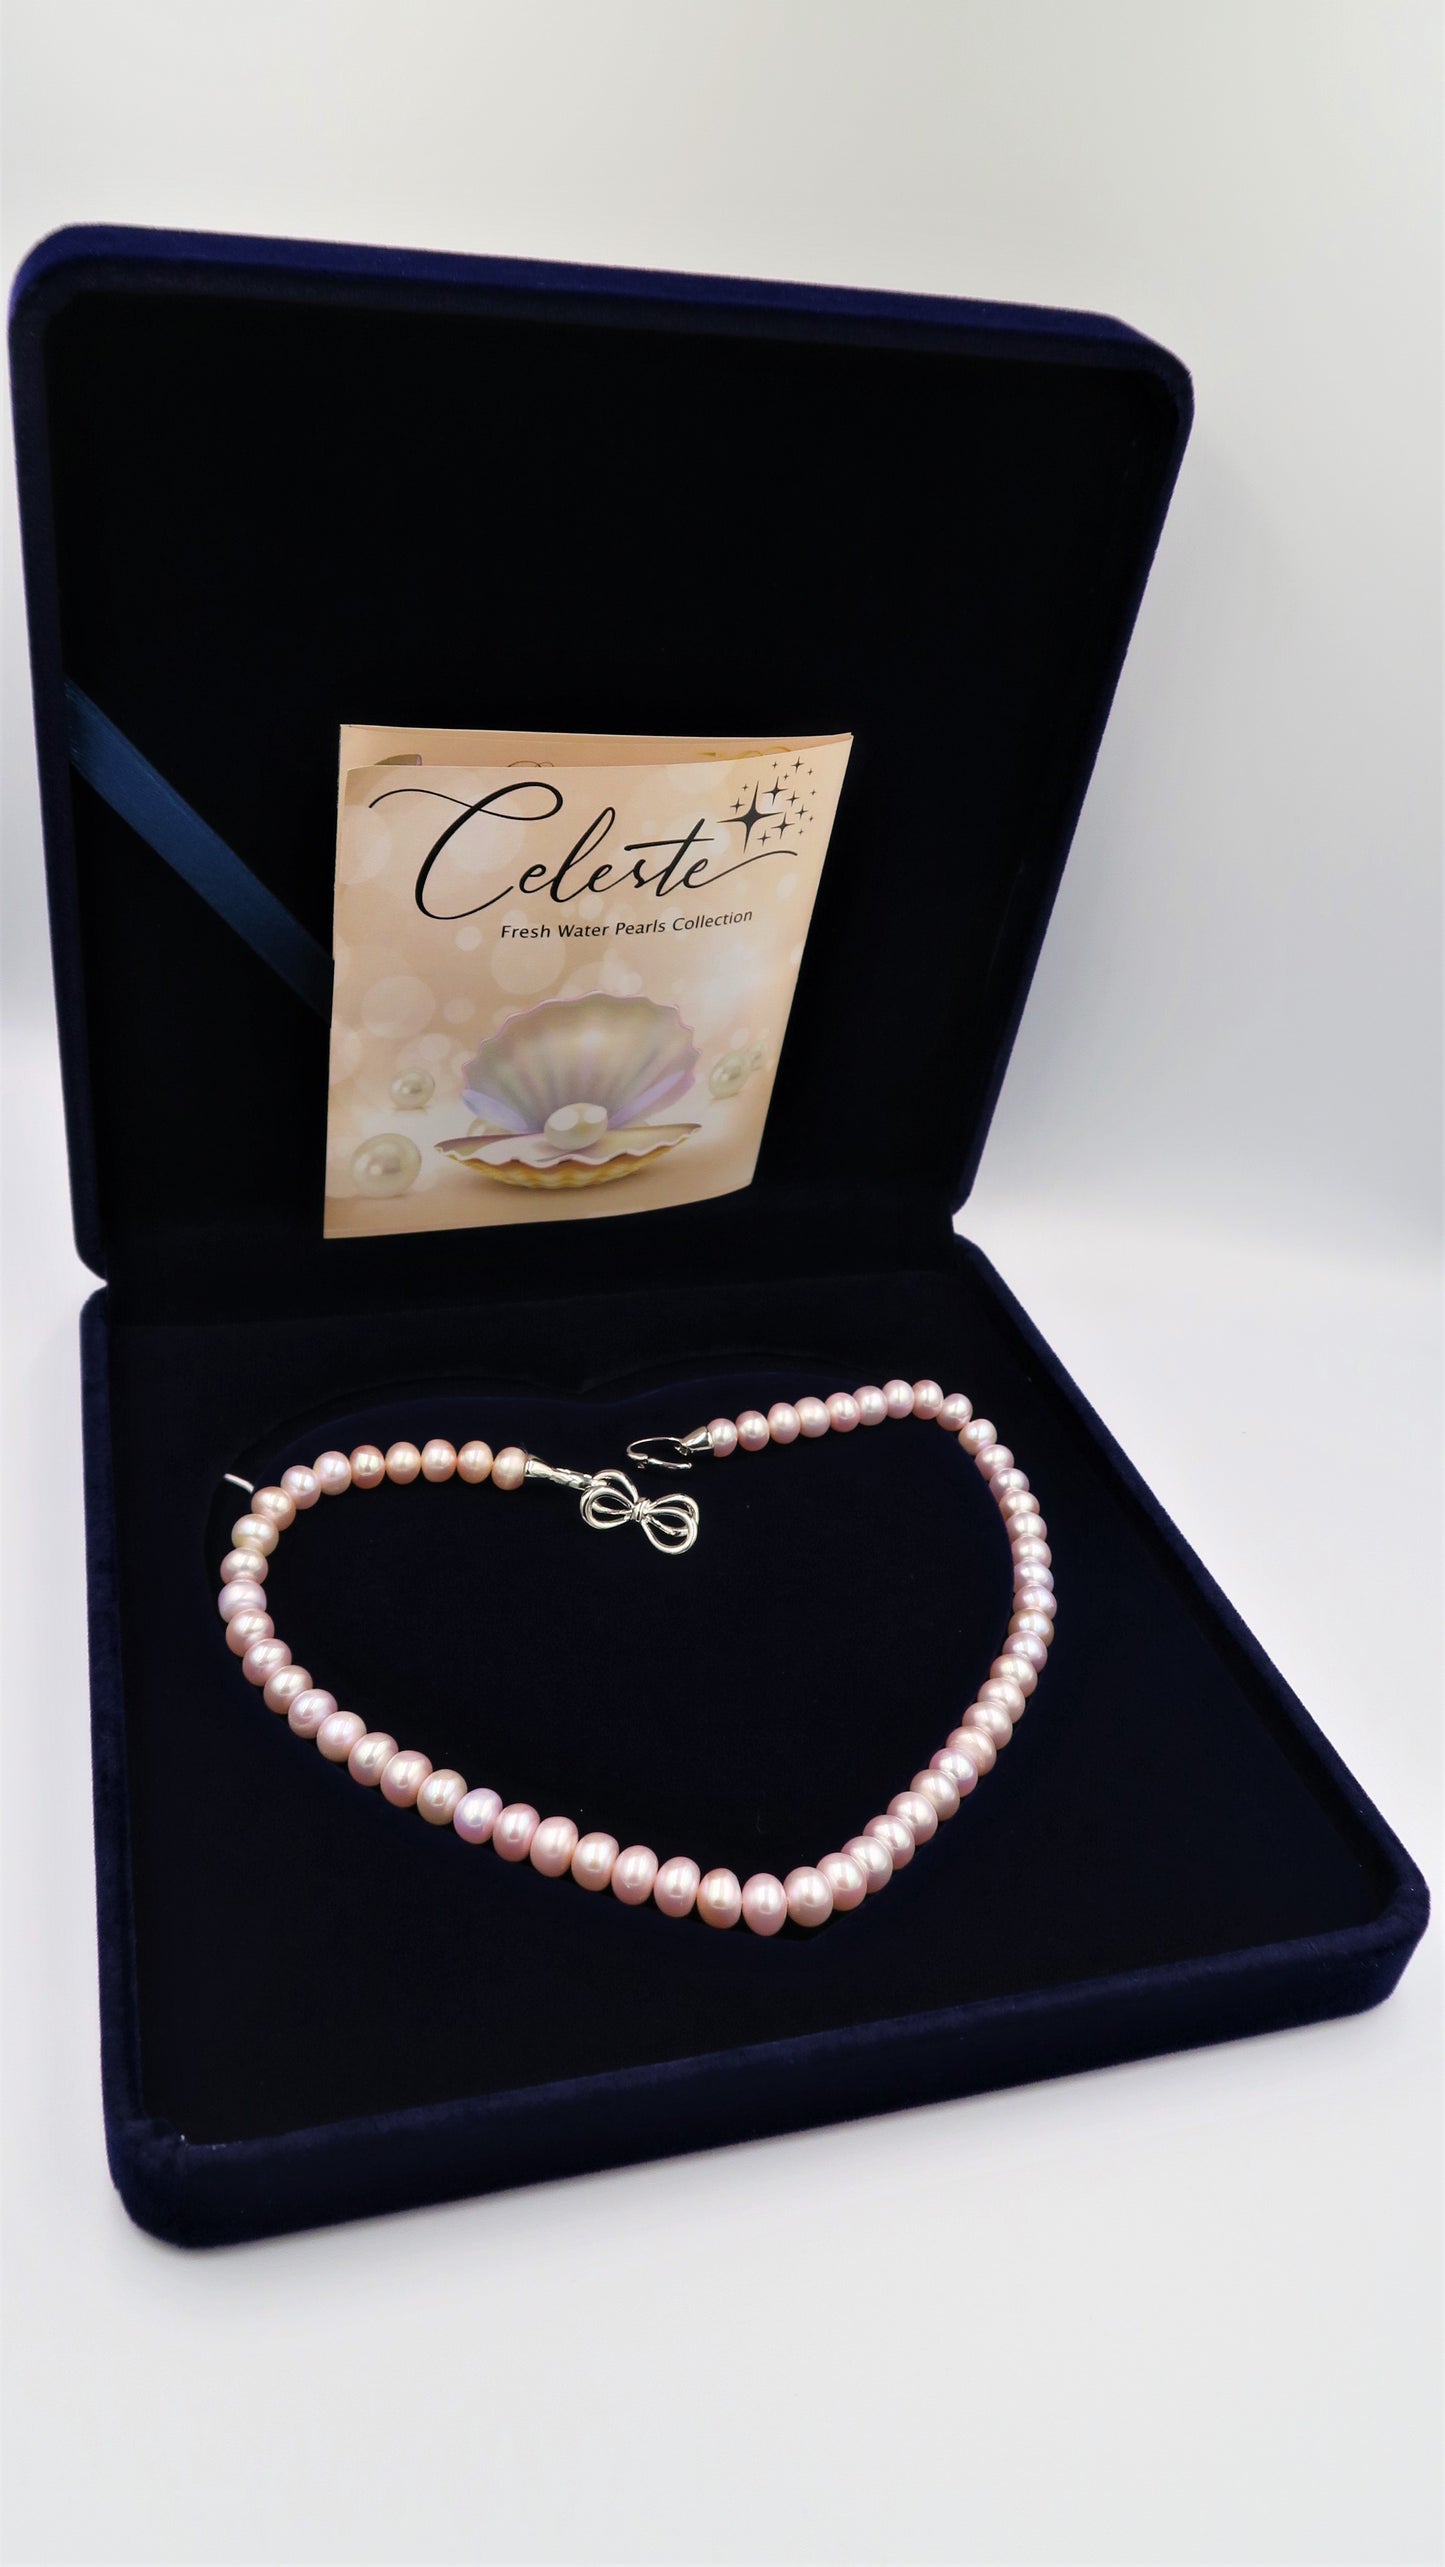 PA - Real Fresh Water Pearl Necklace bow butterfly Celeste 925 Sterling Silver White Pink Purple gift Set